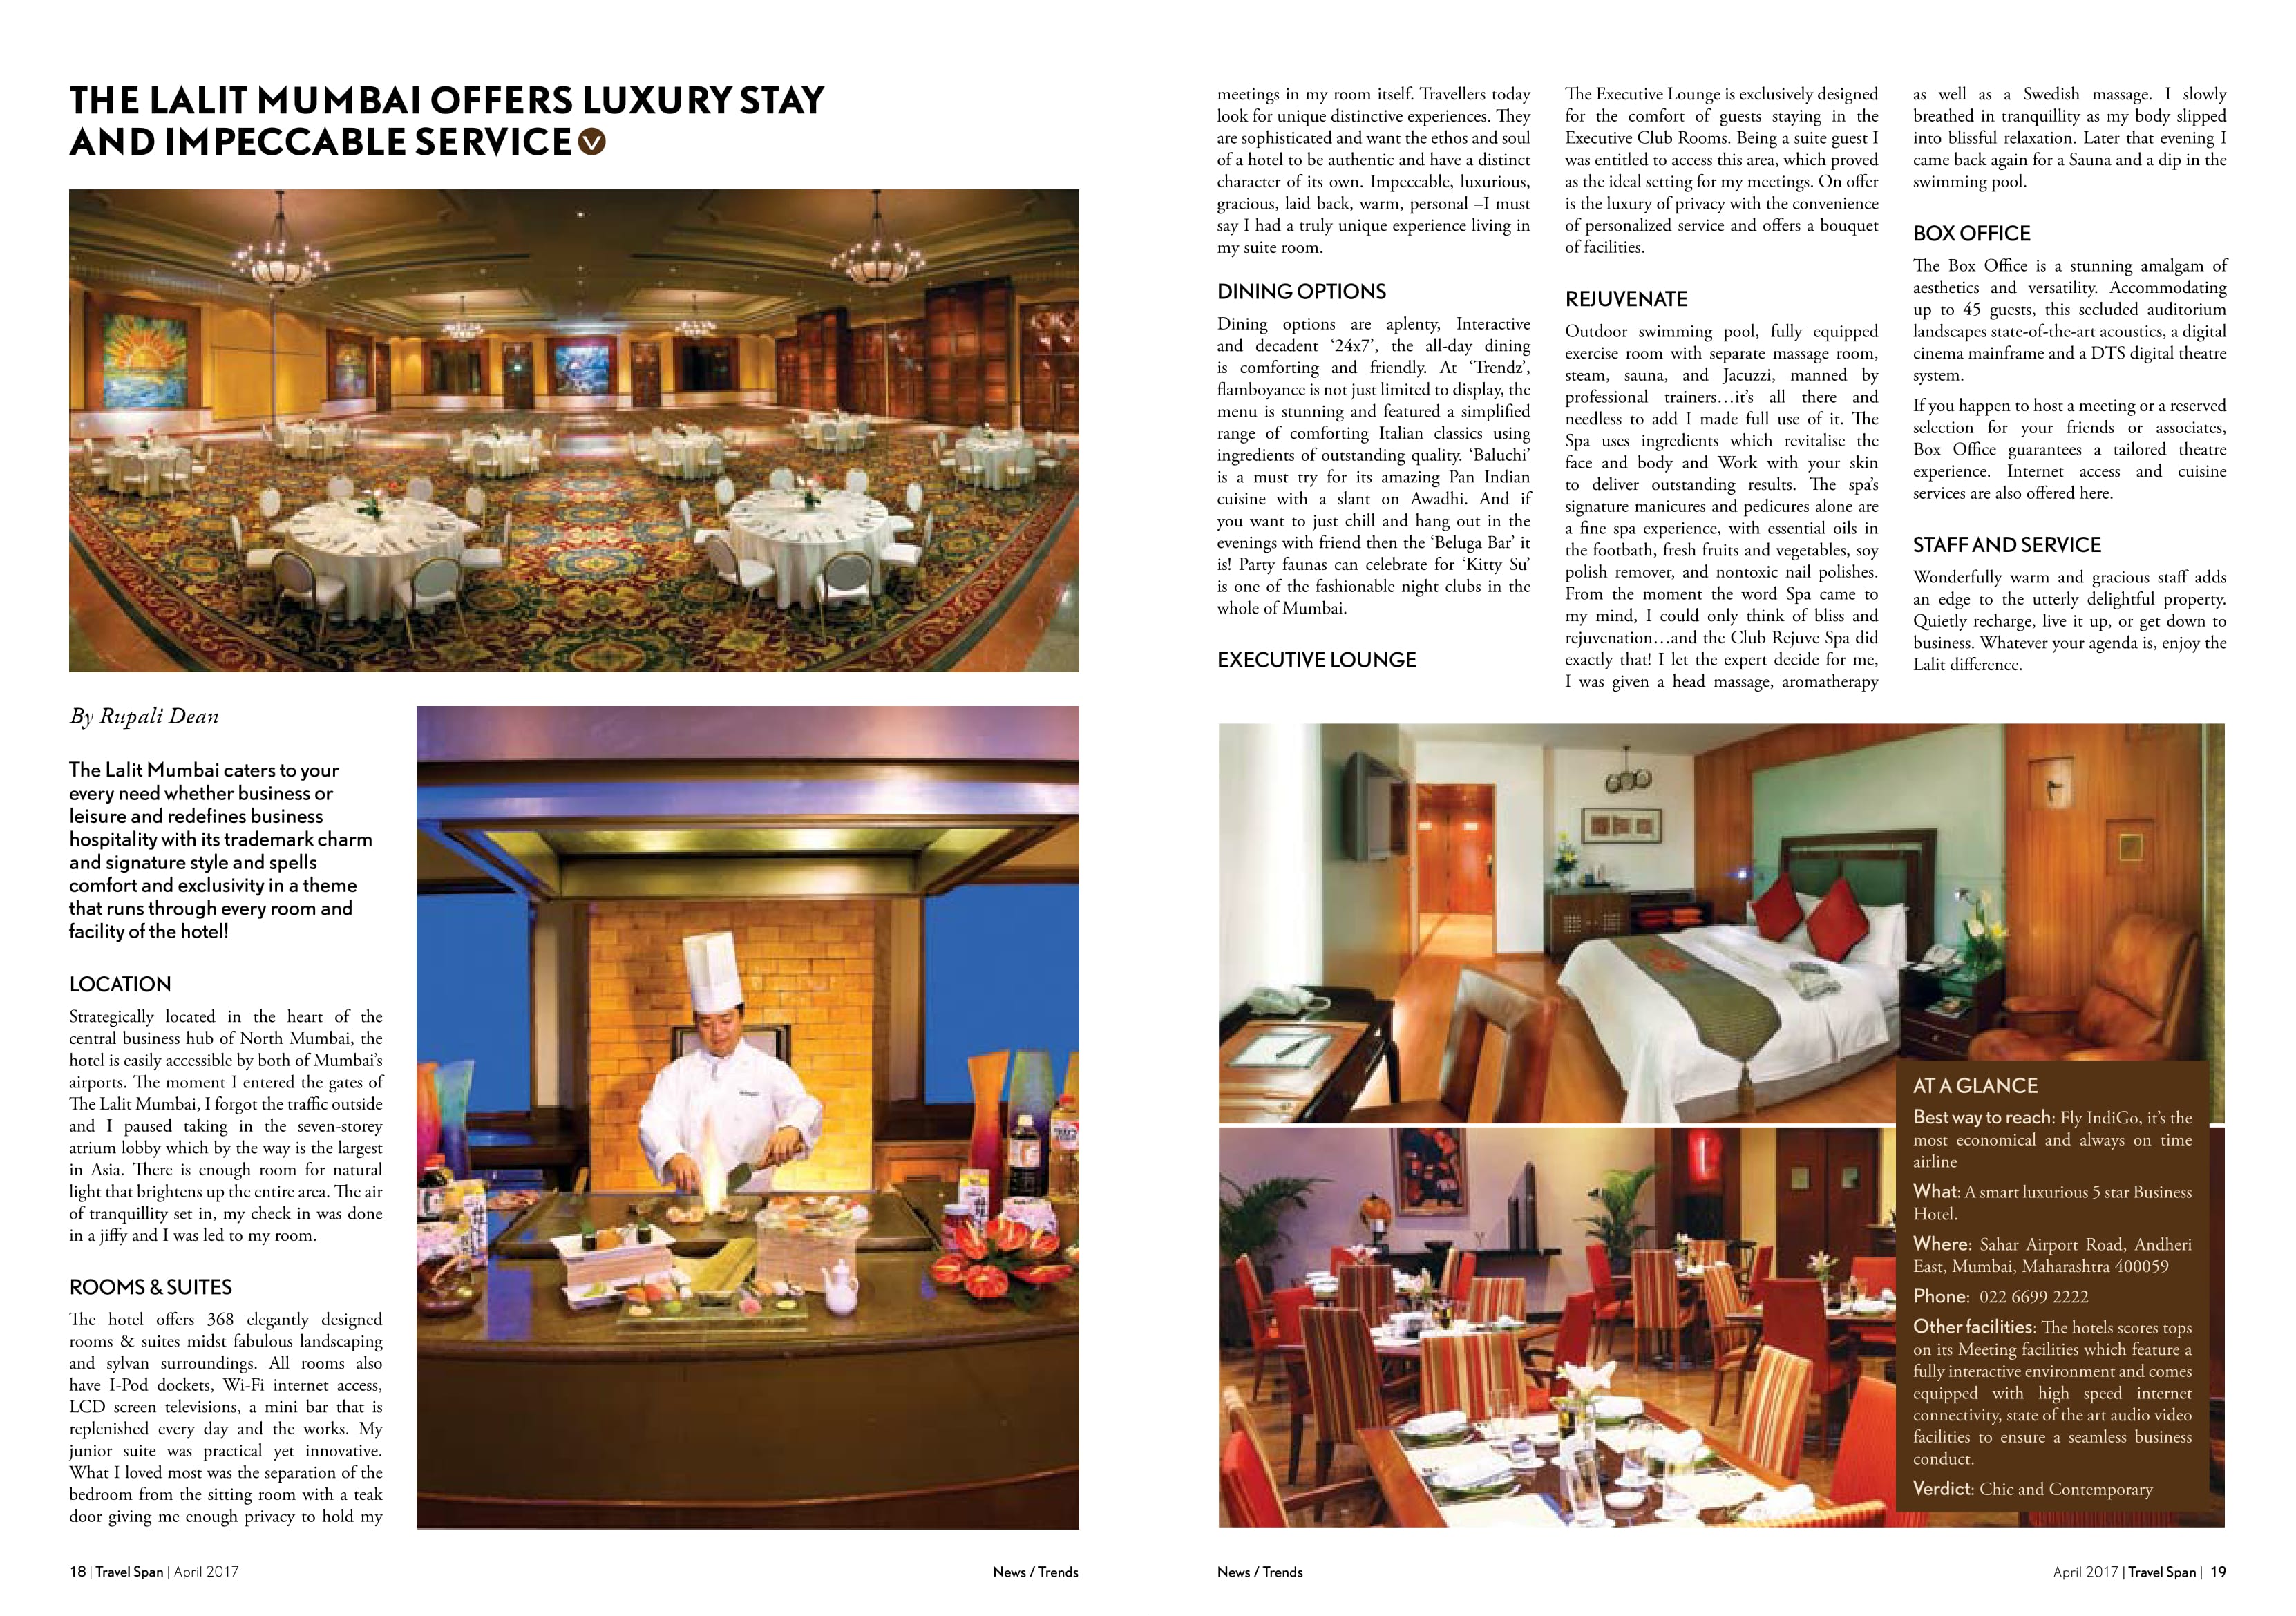 The LaLiT Mumbai offers a Luxurious stay & Impeccable service